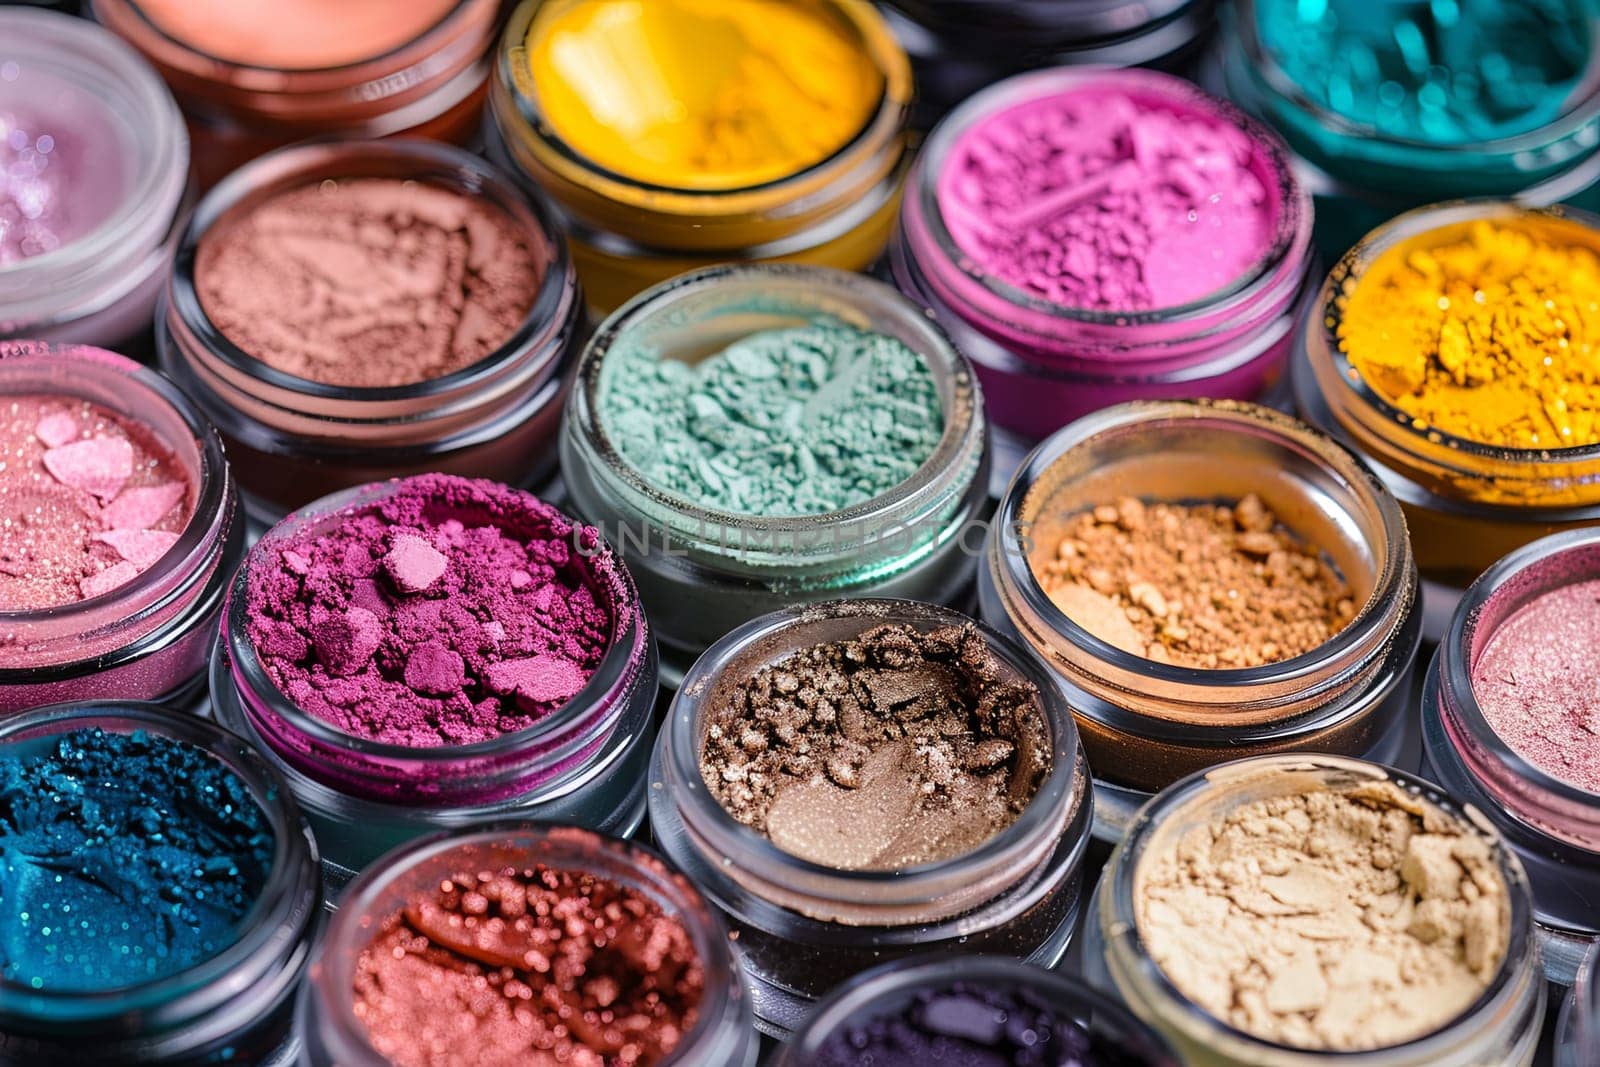 A close-up view of colorful makeup pigments and powders arranged in small glass jars.